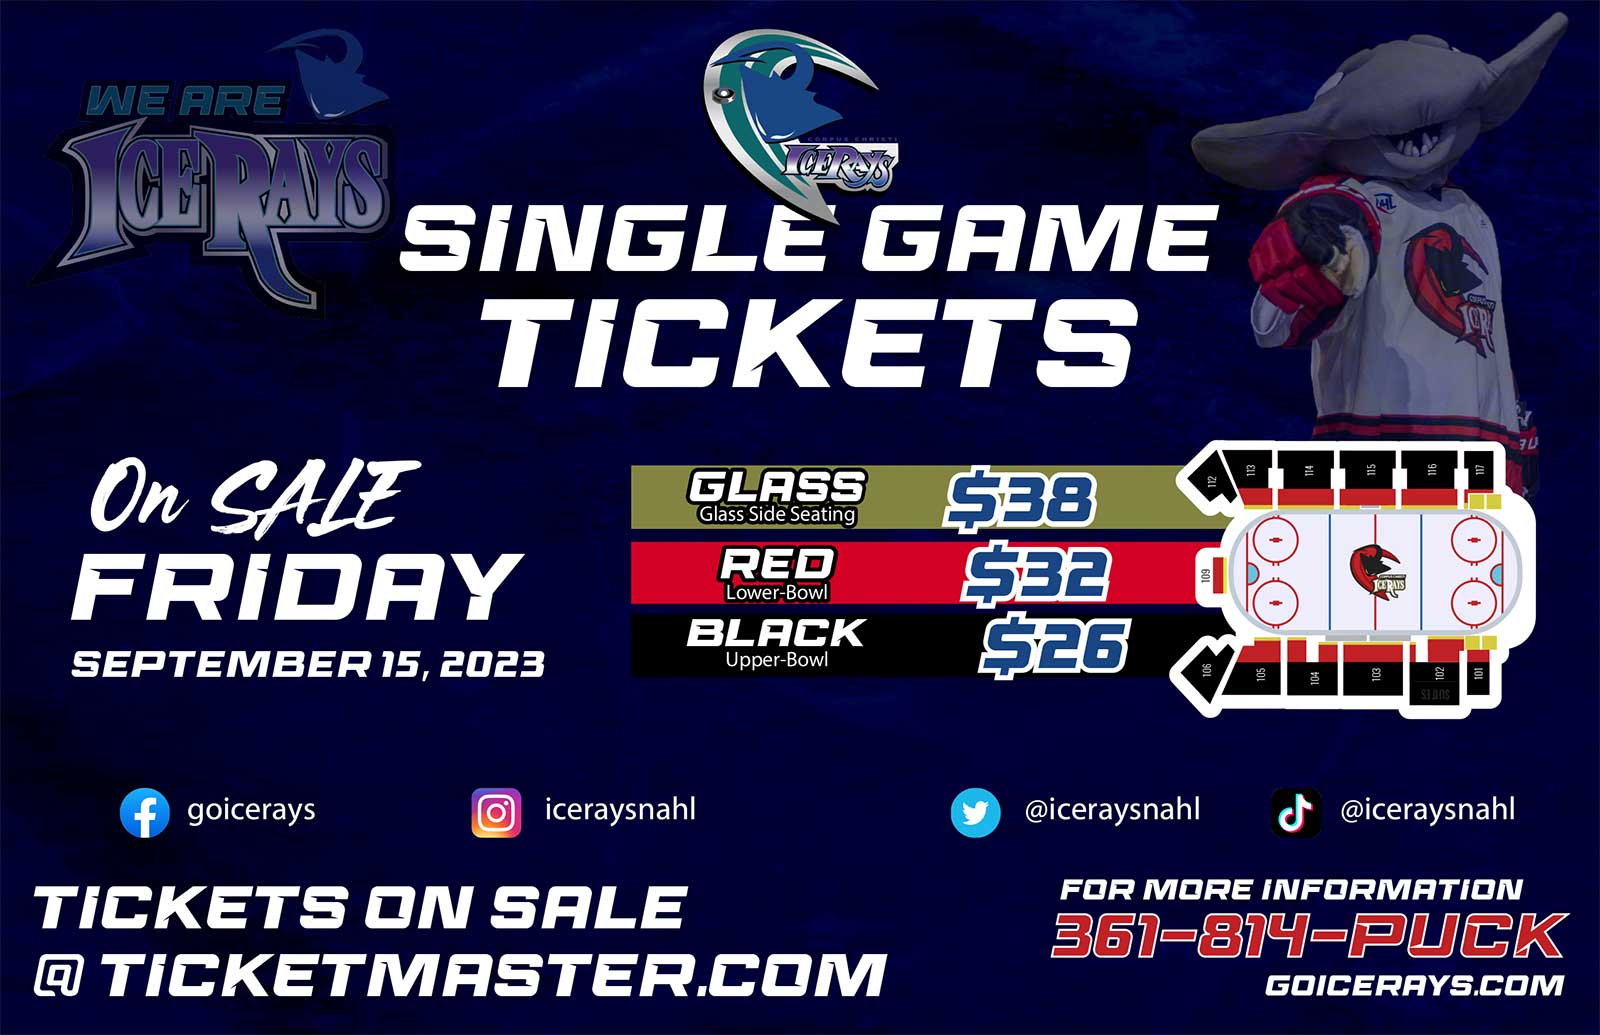 2023-24 Single Game Tickets